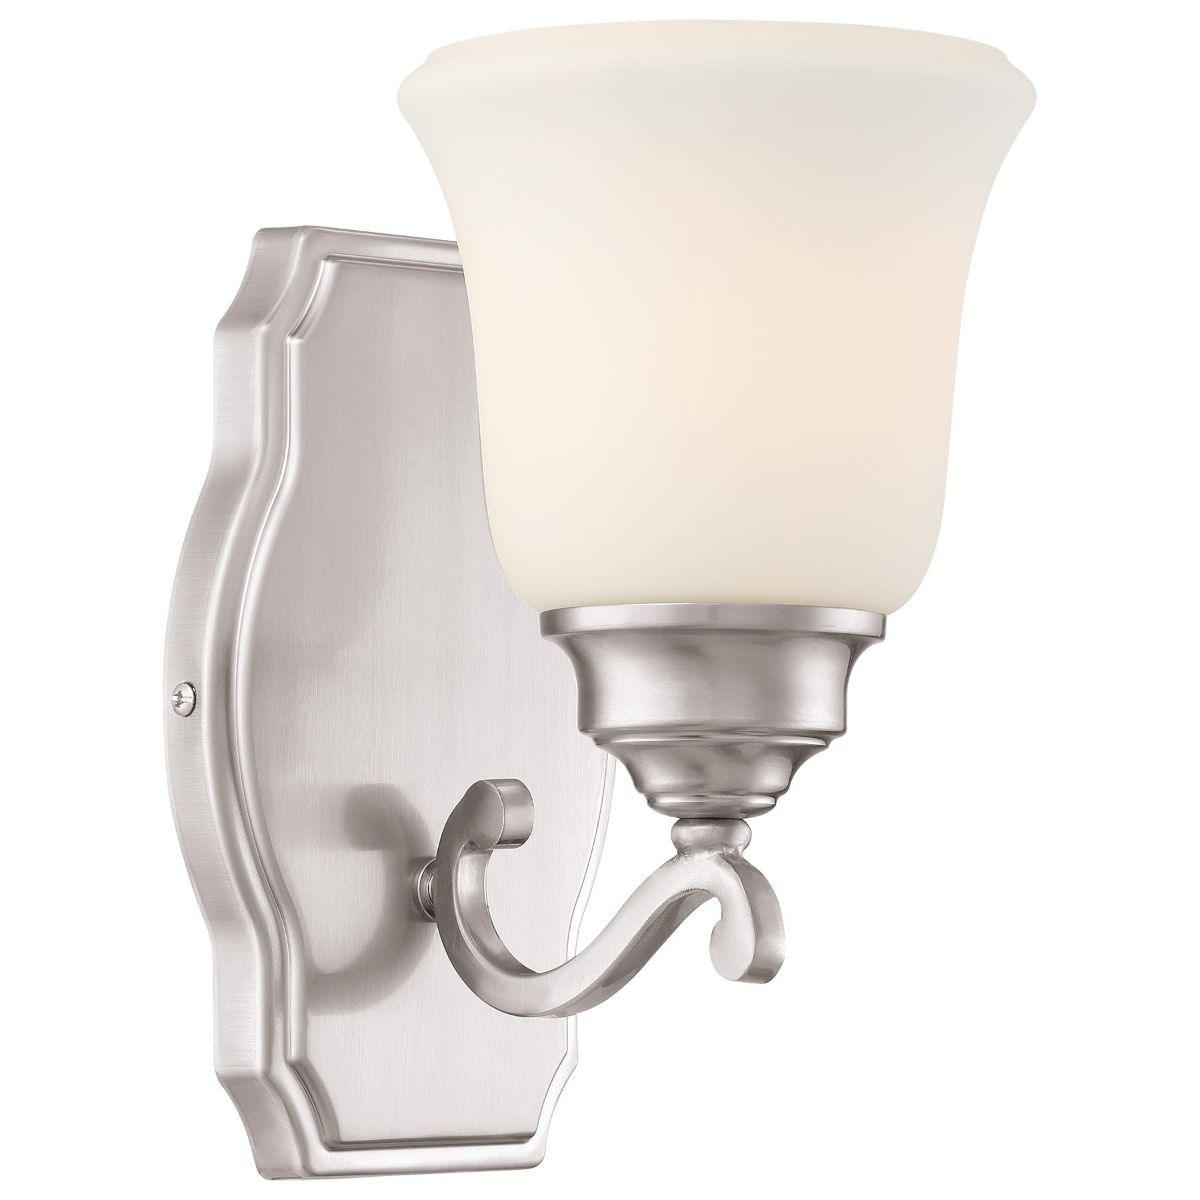 Savannah Row 9 in. Wall Sconce Brushed Nickel finish